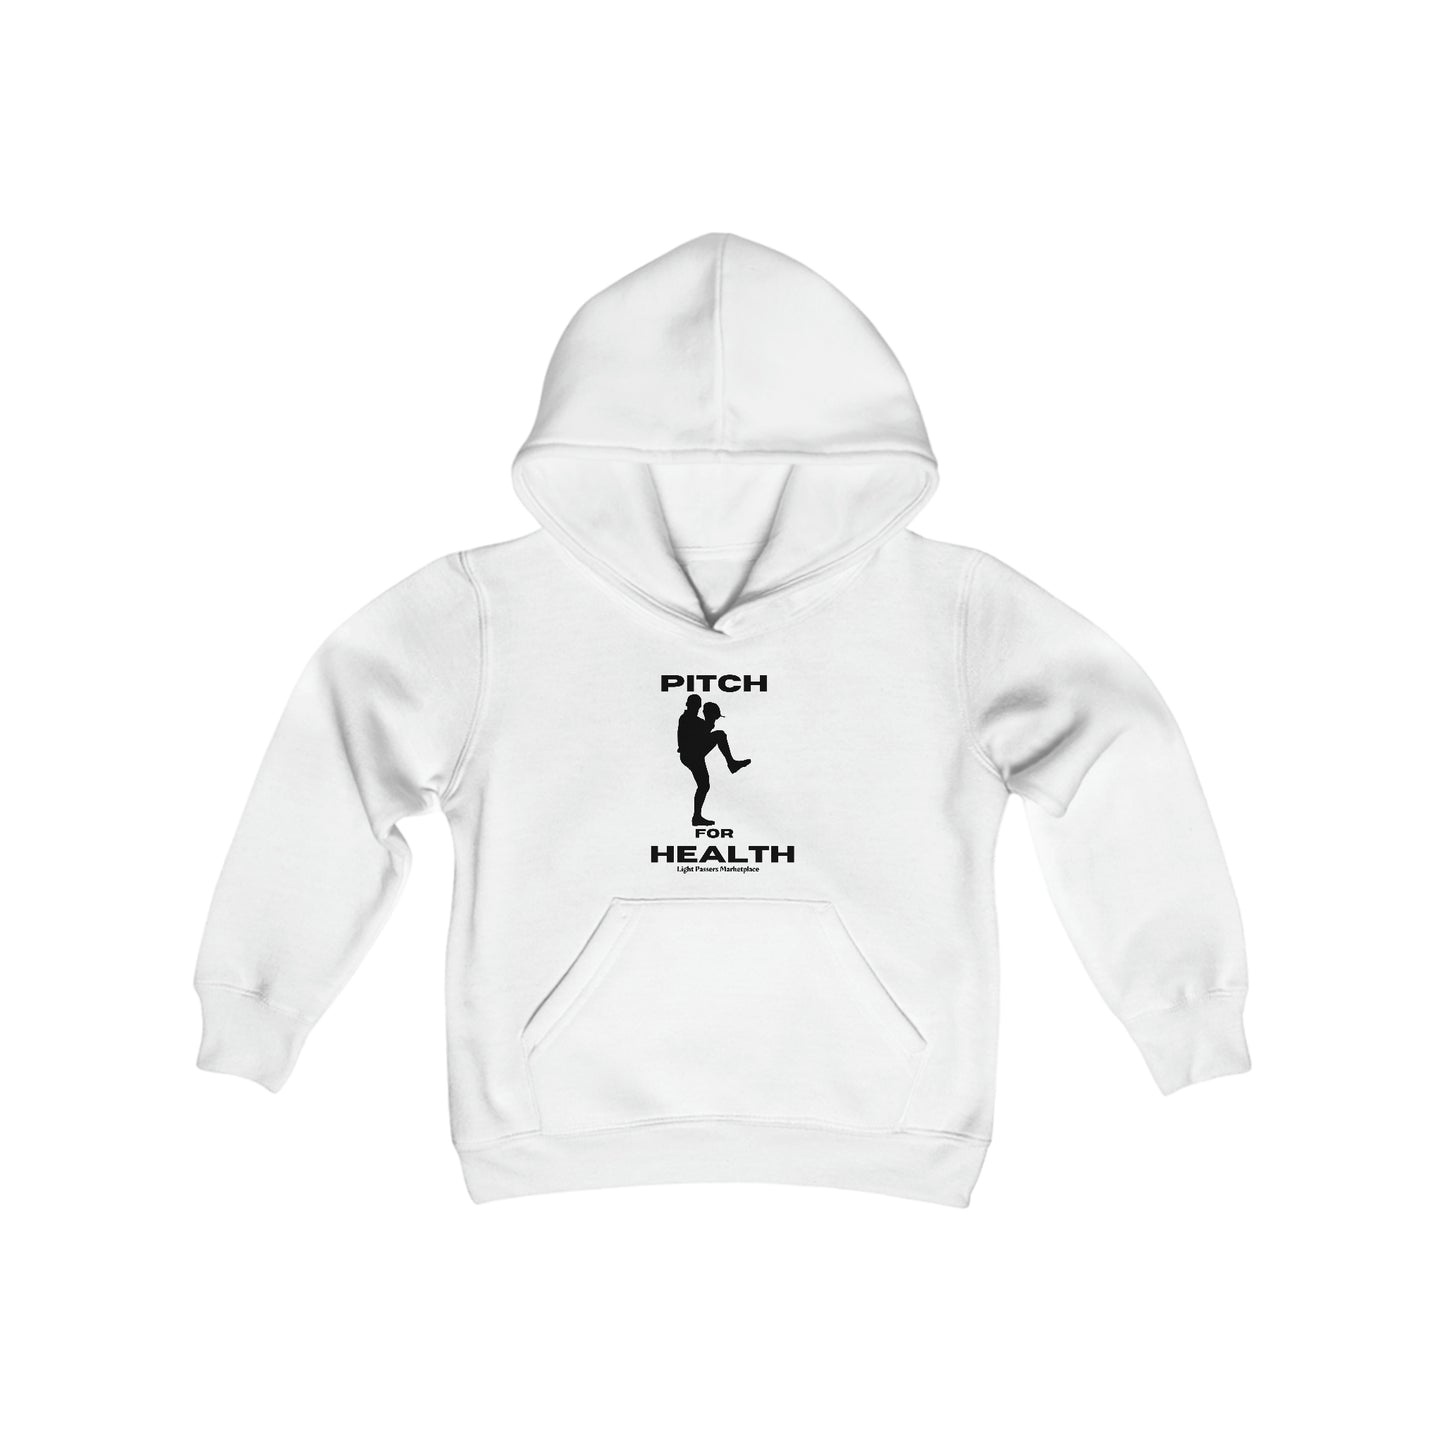 A youth blend hooded sweatshirt featuring a kangaroo pocket, made of soft fleece (50% cotton, 50% polyester). Reinforced neck with twill taping for durability. Regular fit, ideal for printing.